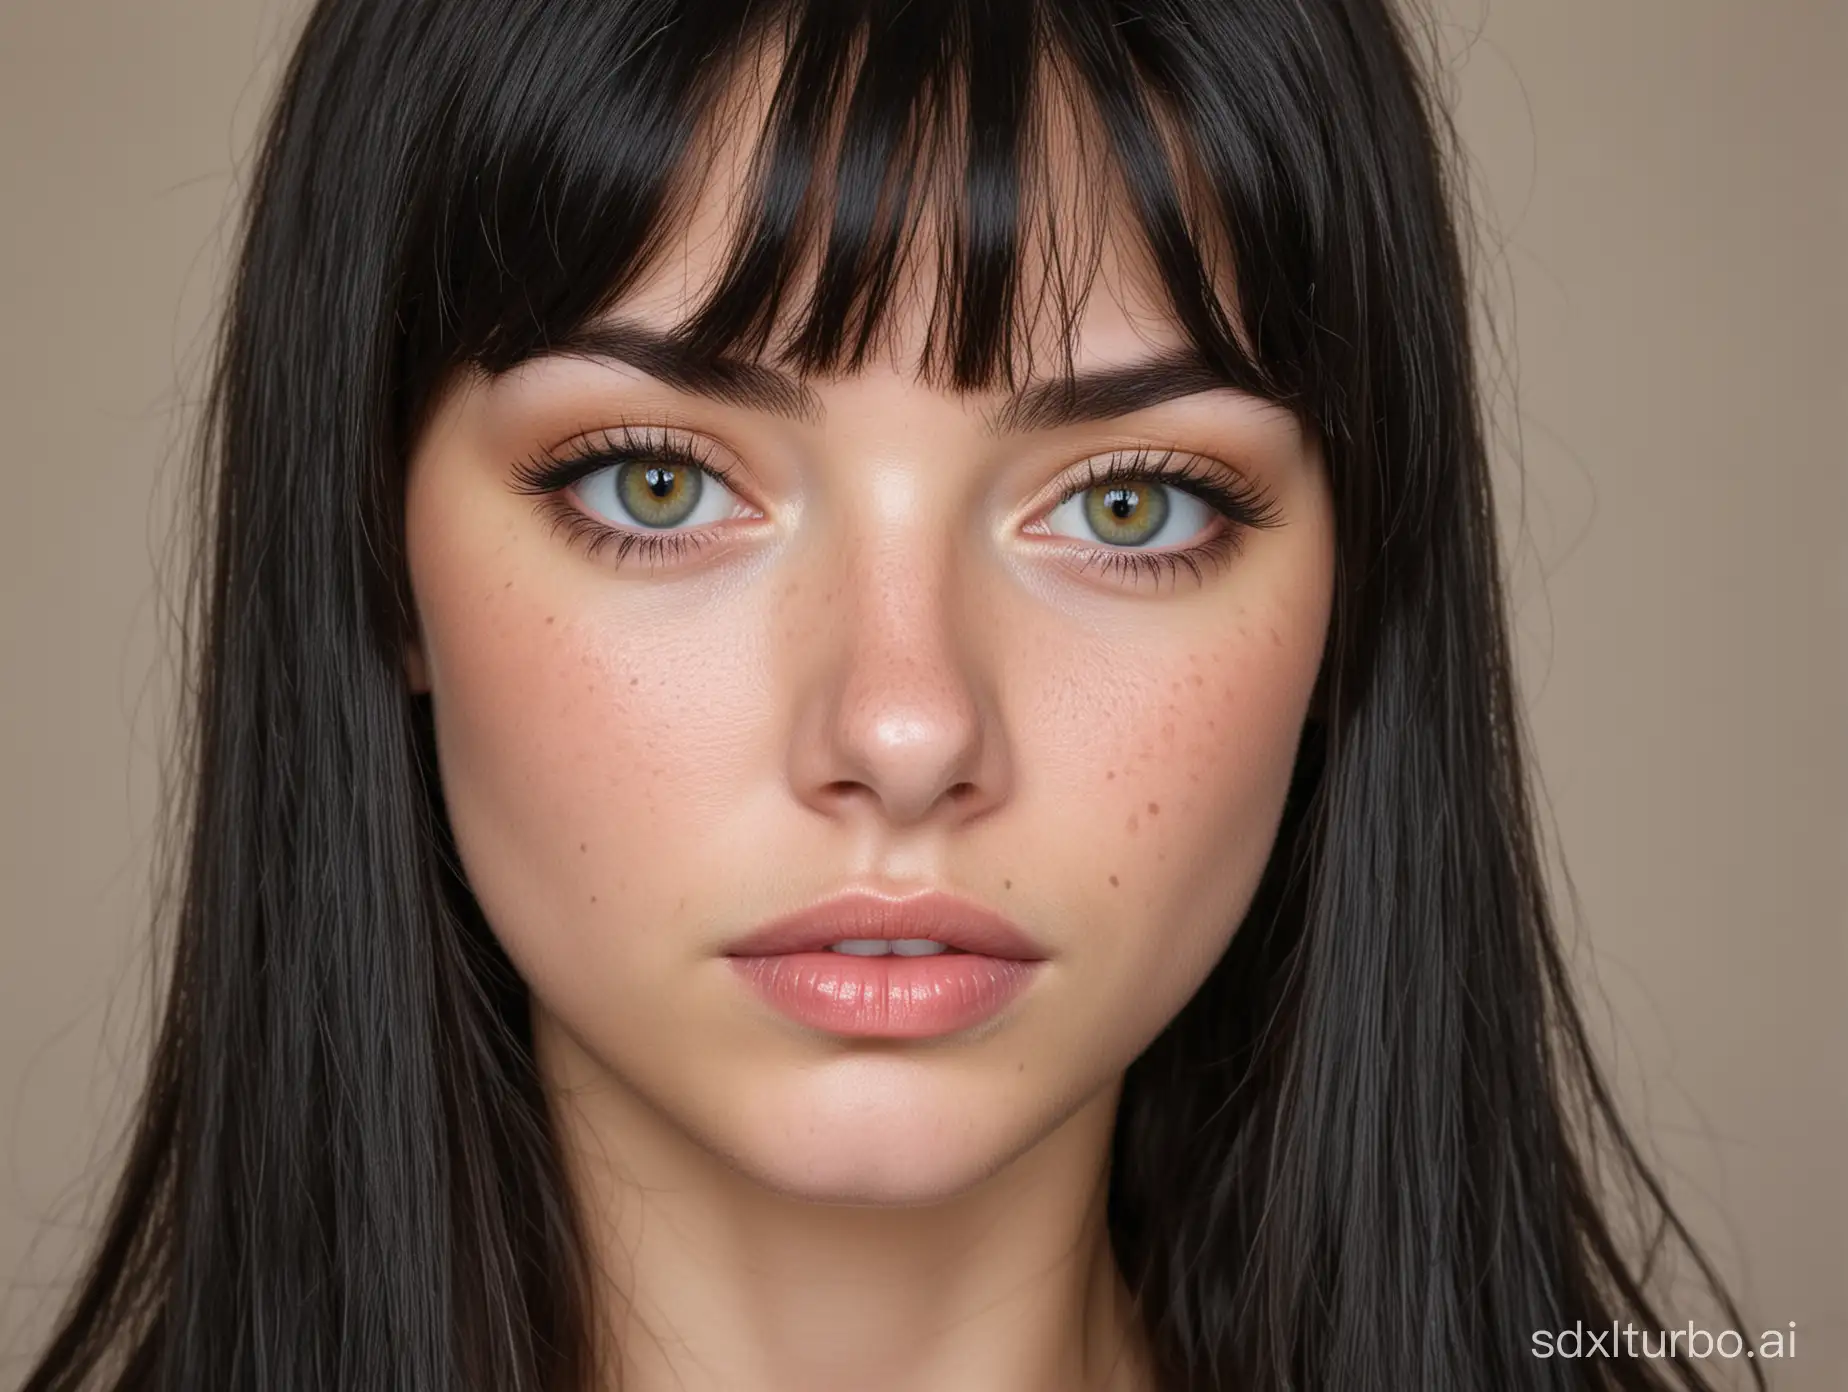 Youthful-Freckled-Beauty-24YearOld-Woman-with-Hazel-Green-Eyes-and-Black-Straight-Hair